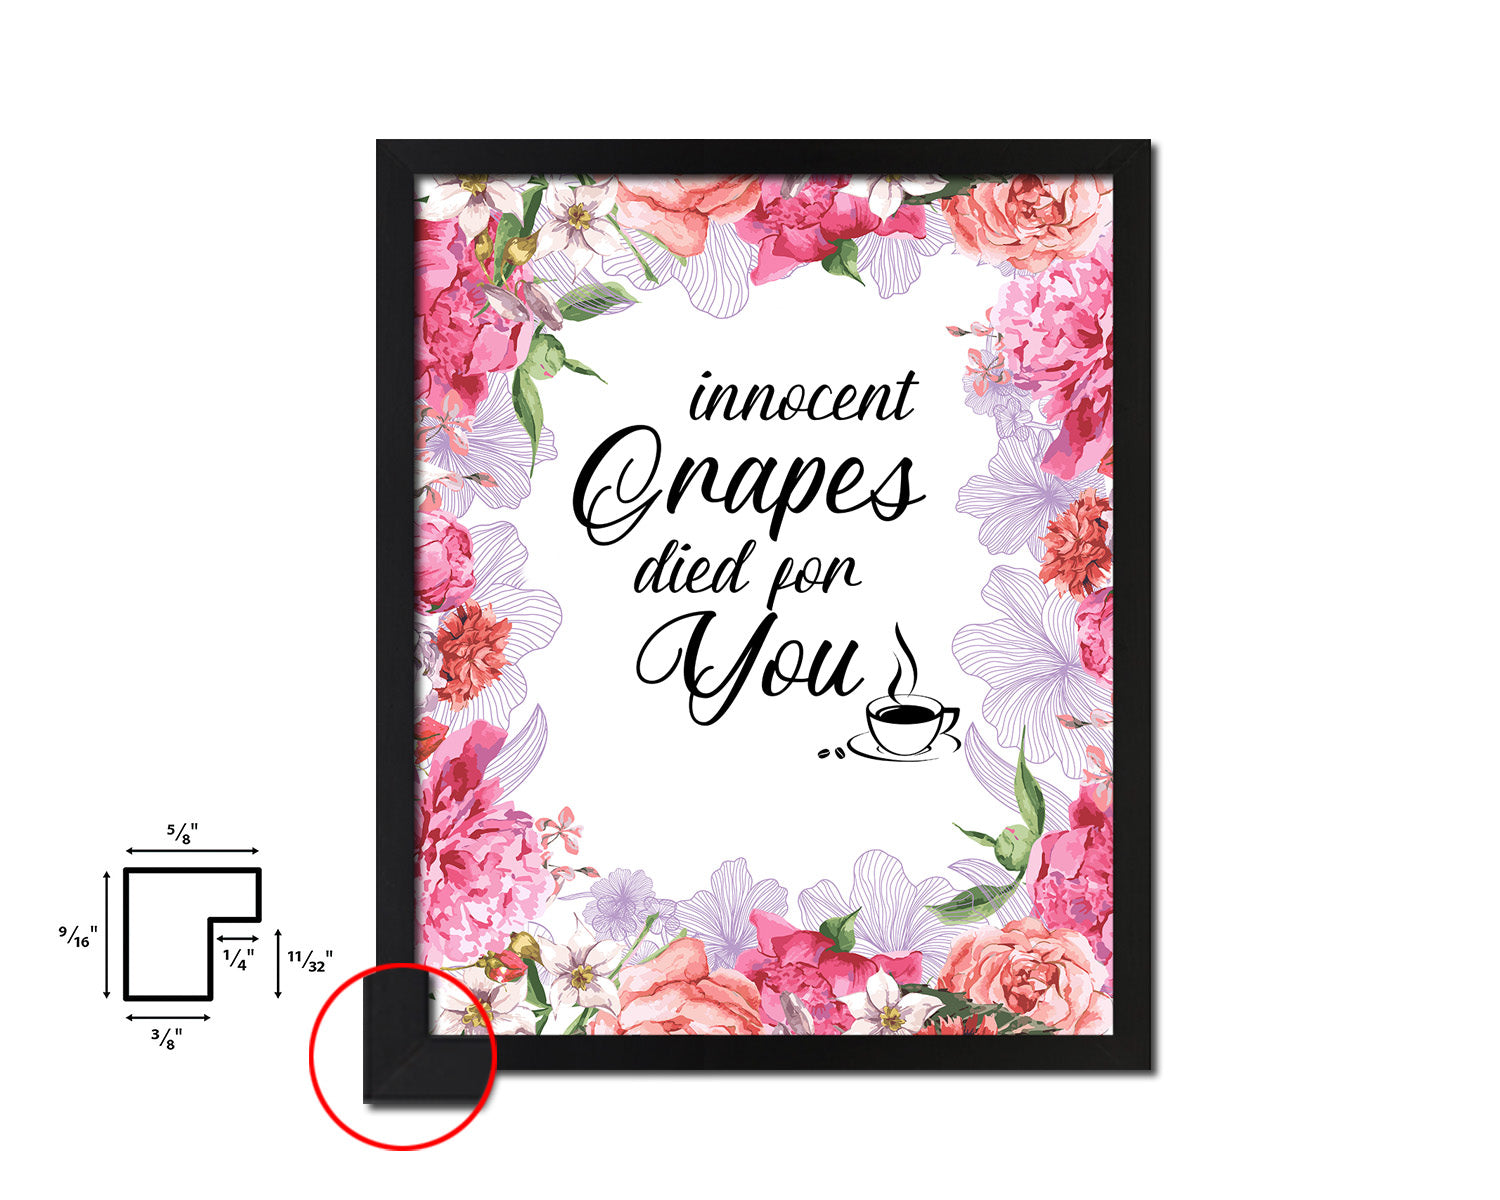 Innocent grapes died for you Quote Framed Artwork Print Wall Decor Art Gifts